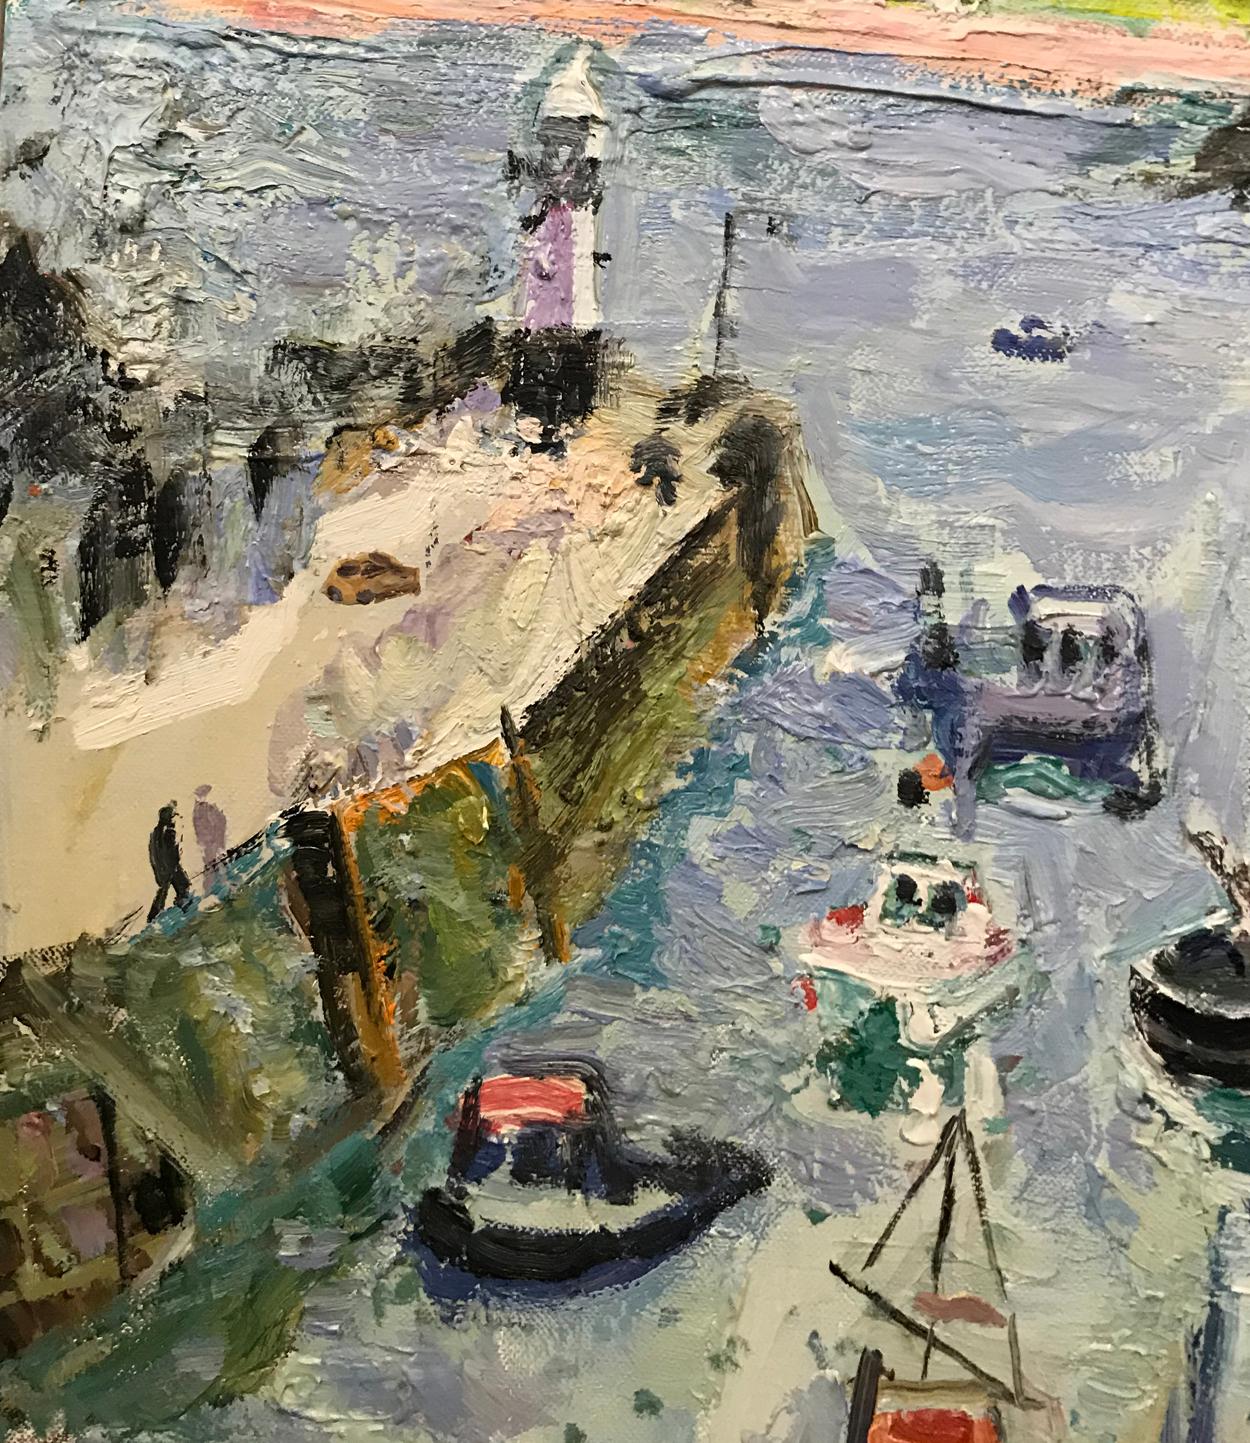 Linda Weir 'English', St Ives Harbour Cornwall, Oil on Canvas, Painted in 2006 2